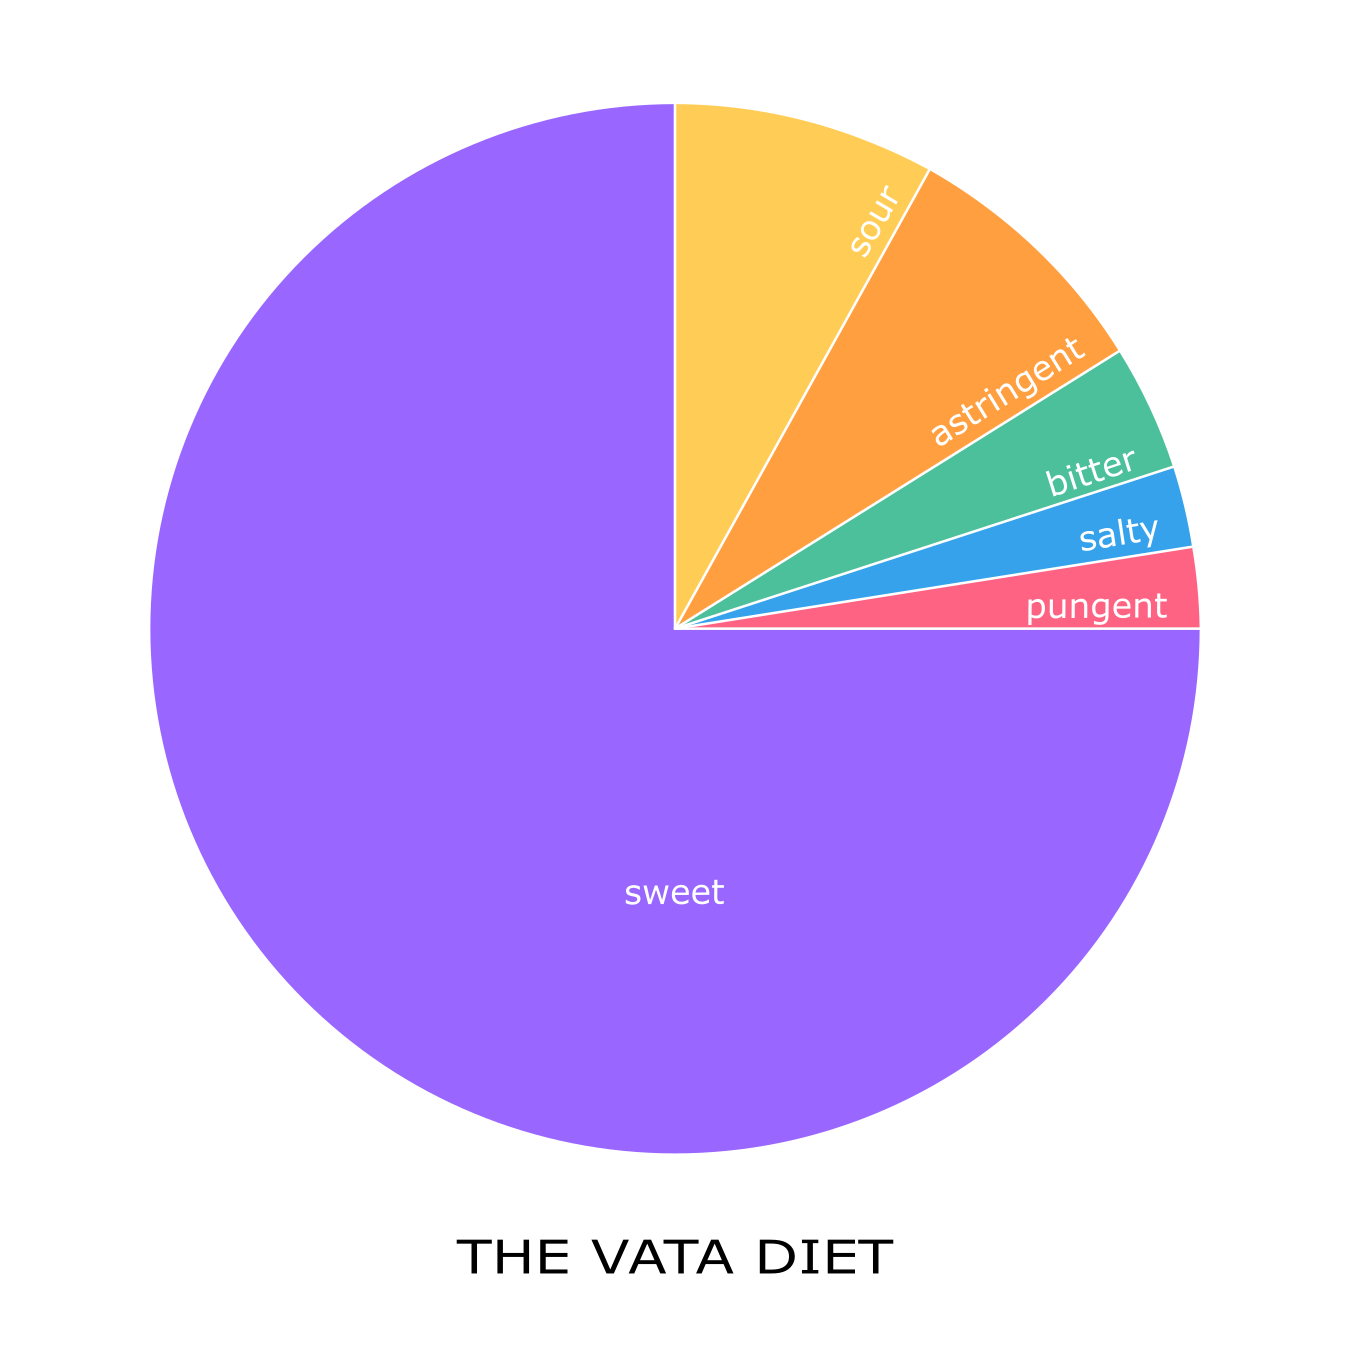 A colorful pie chart showing the recommended intake of the six flavors for VATA according to Ayurveda.